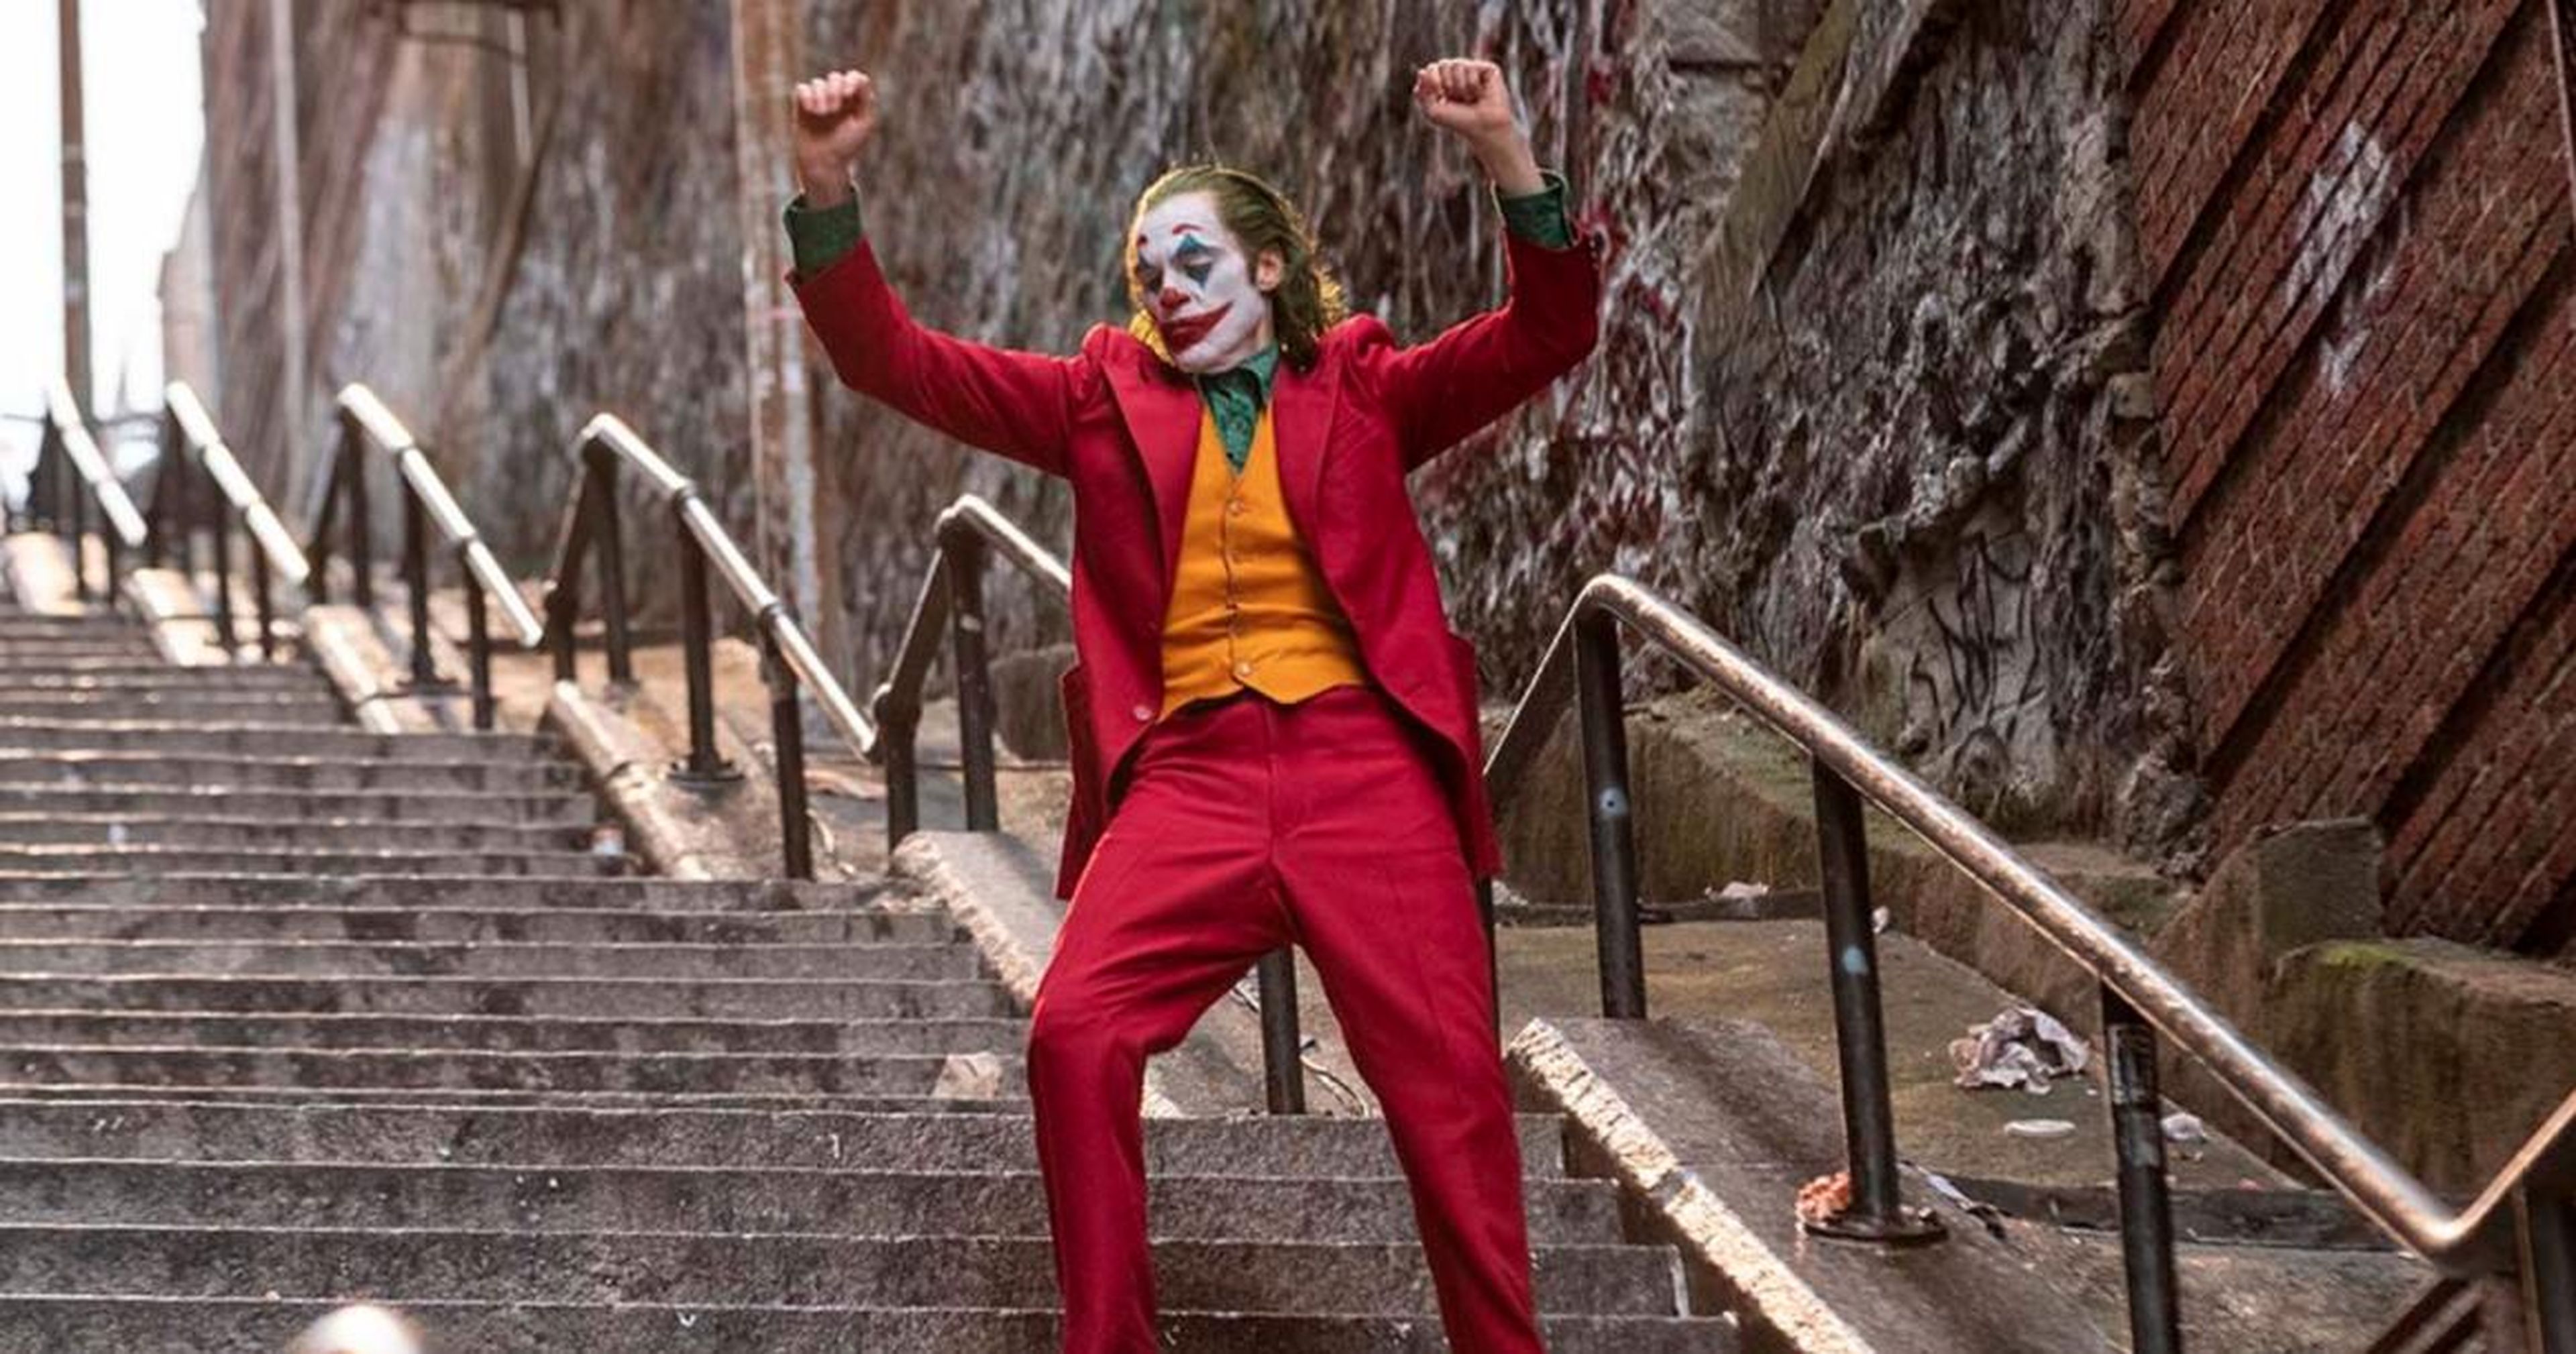 "Joker" is expected to surpass "Deadpool" as the biggest R-rated movie ever.